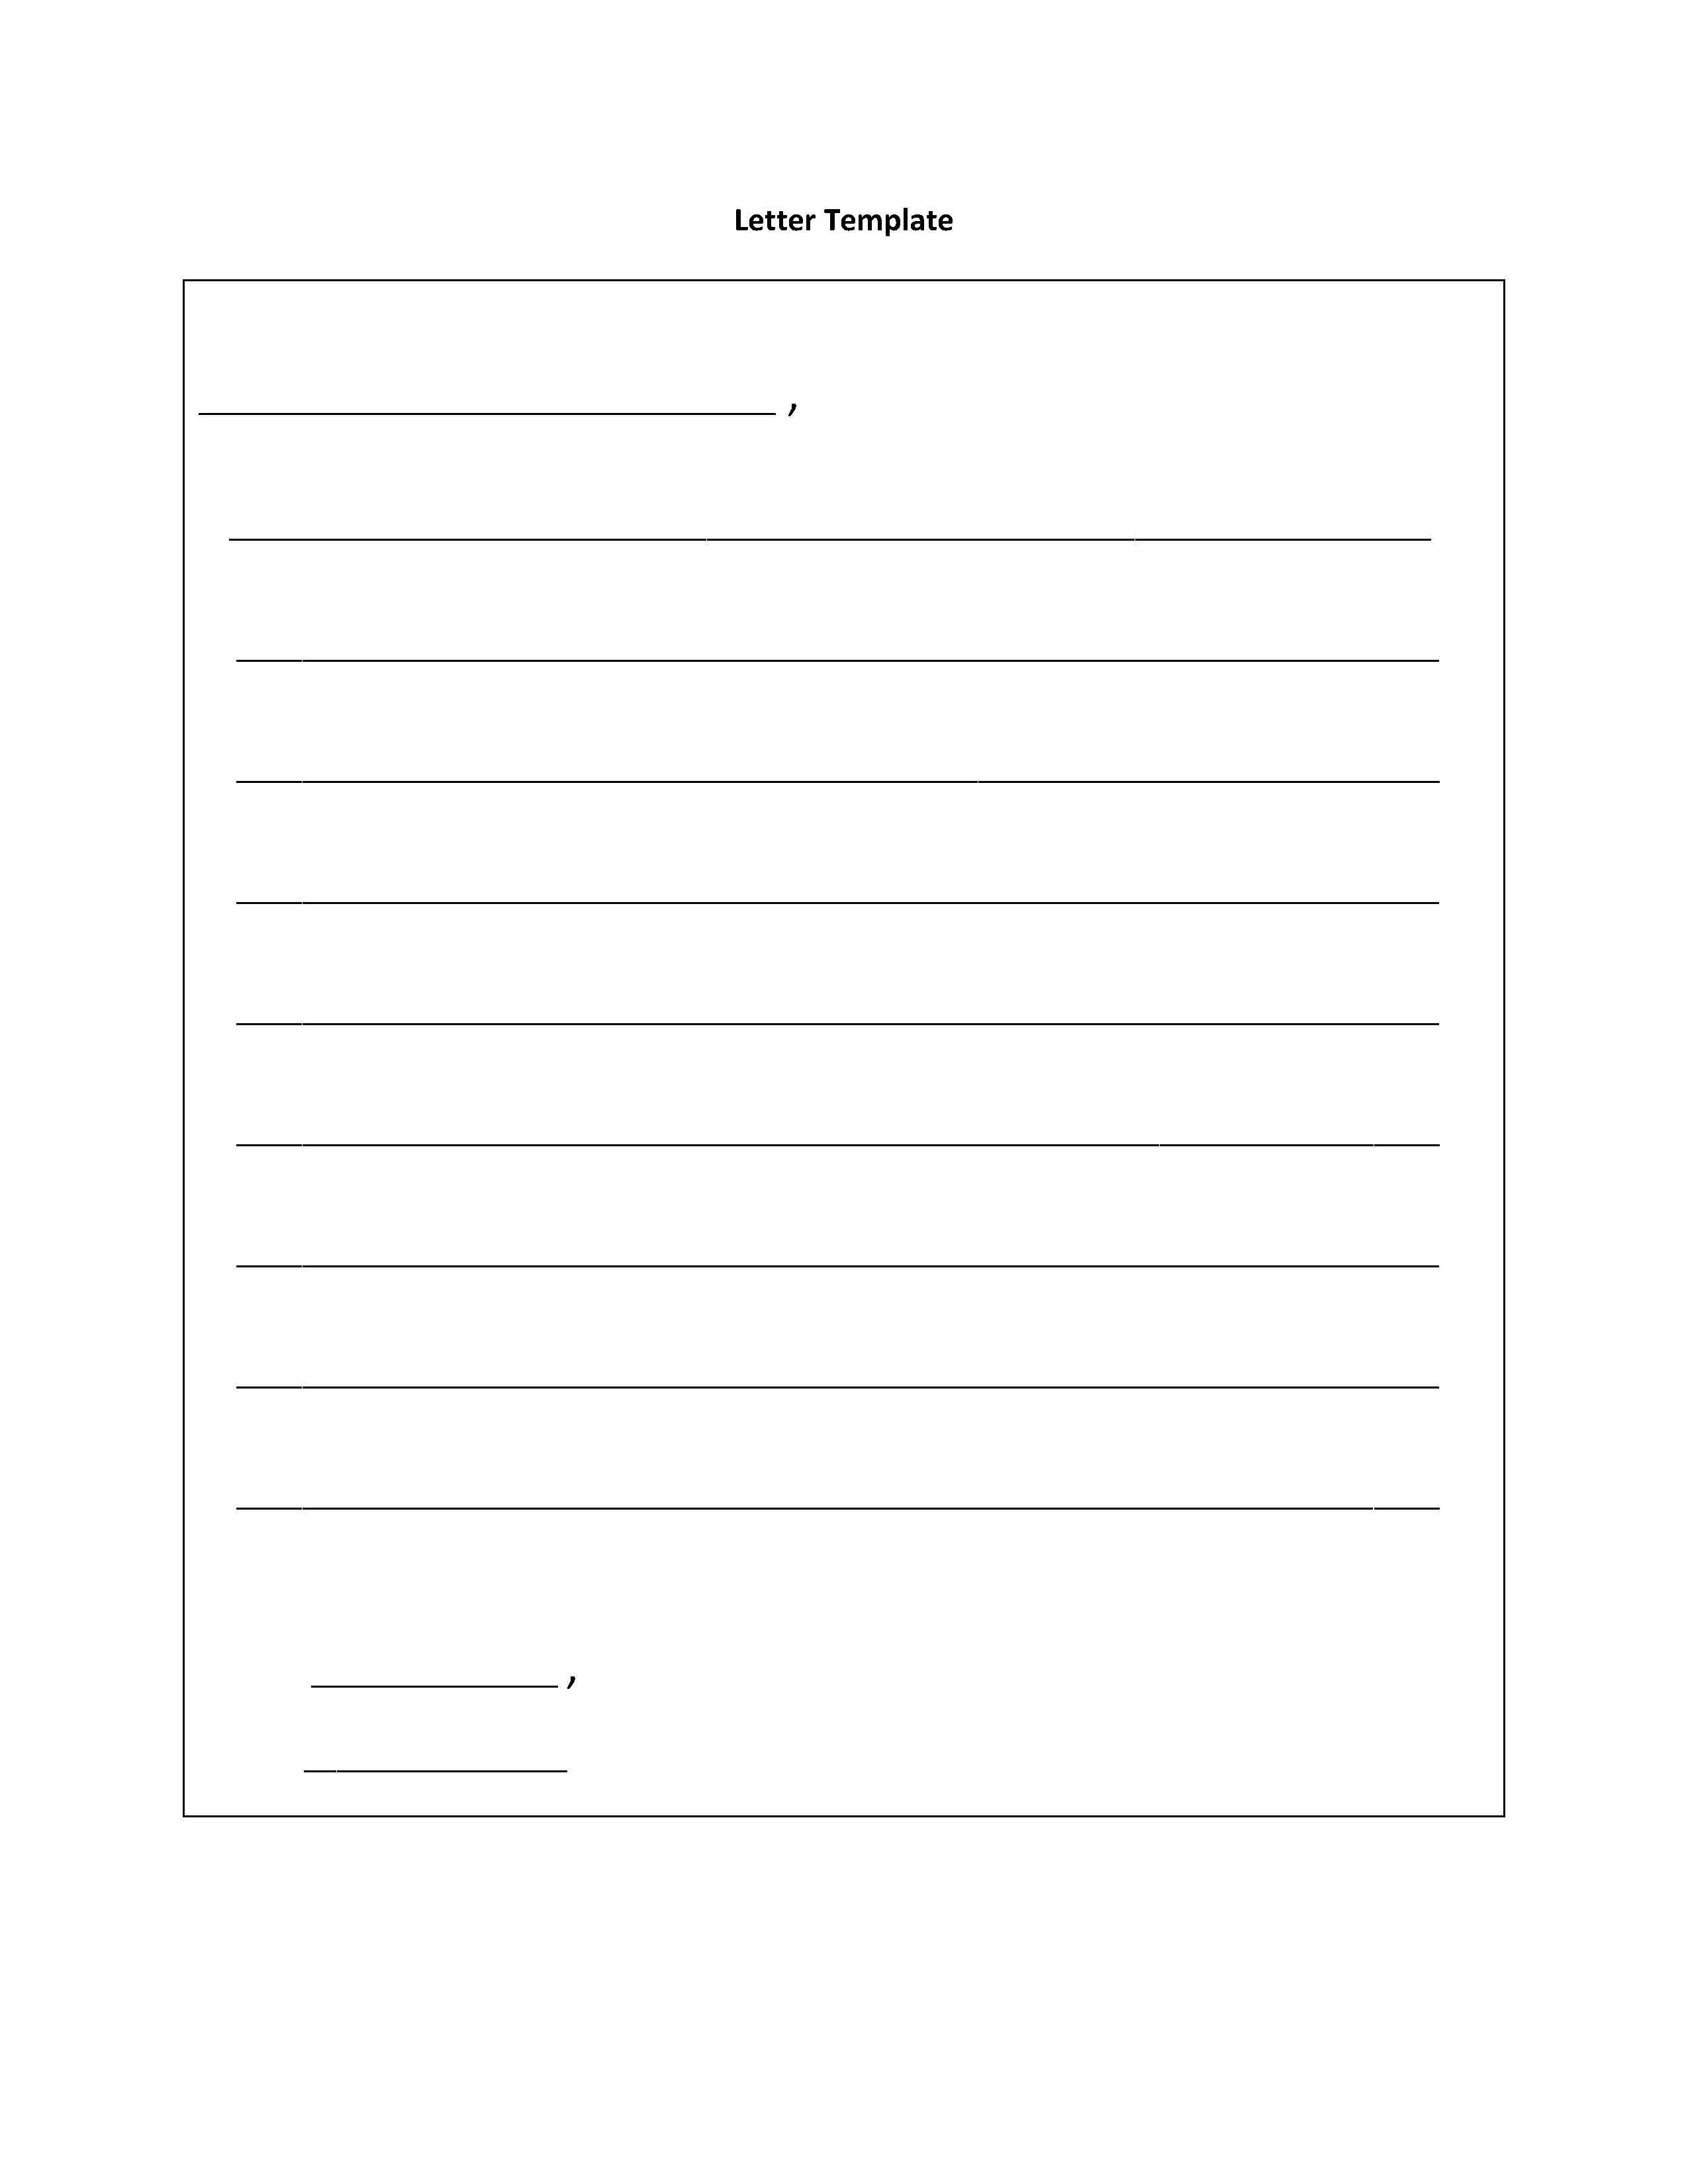 8 Best Images Of Printable Blank Letter Template Letter Writing - Vrogue